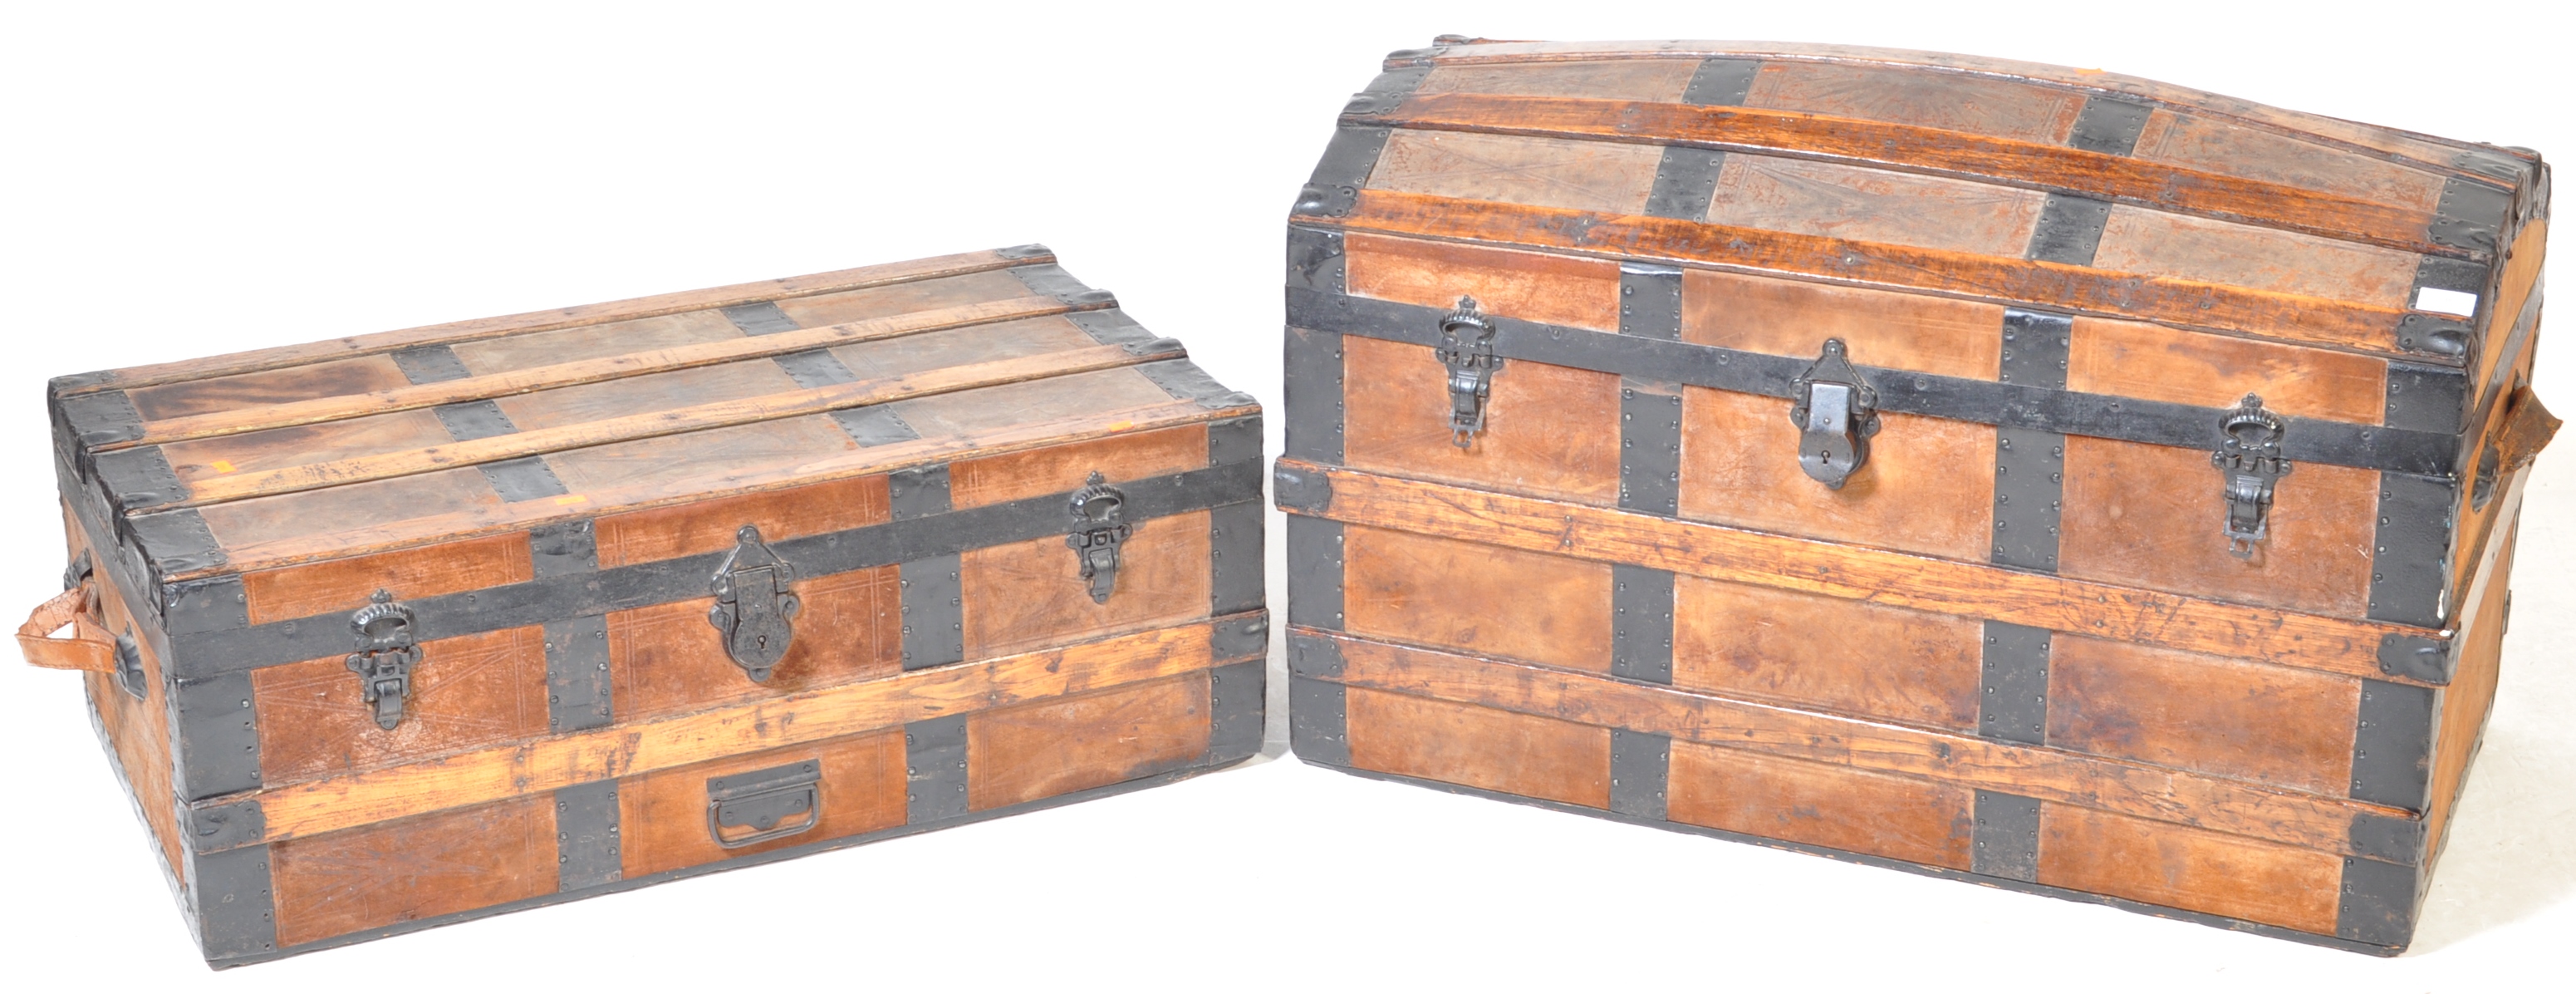 TWO EARLY 20TH CENTURY WOODEN TRUNKS / SHIPPING TRUNKS - Image 2 of 7